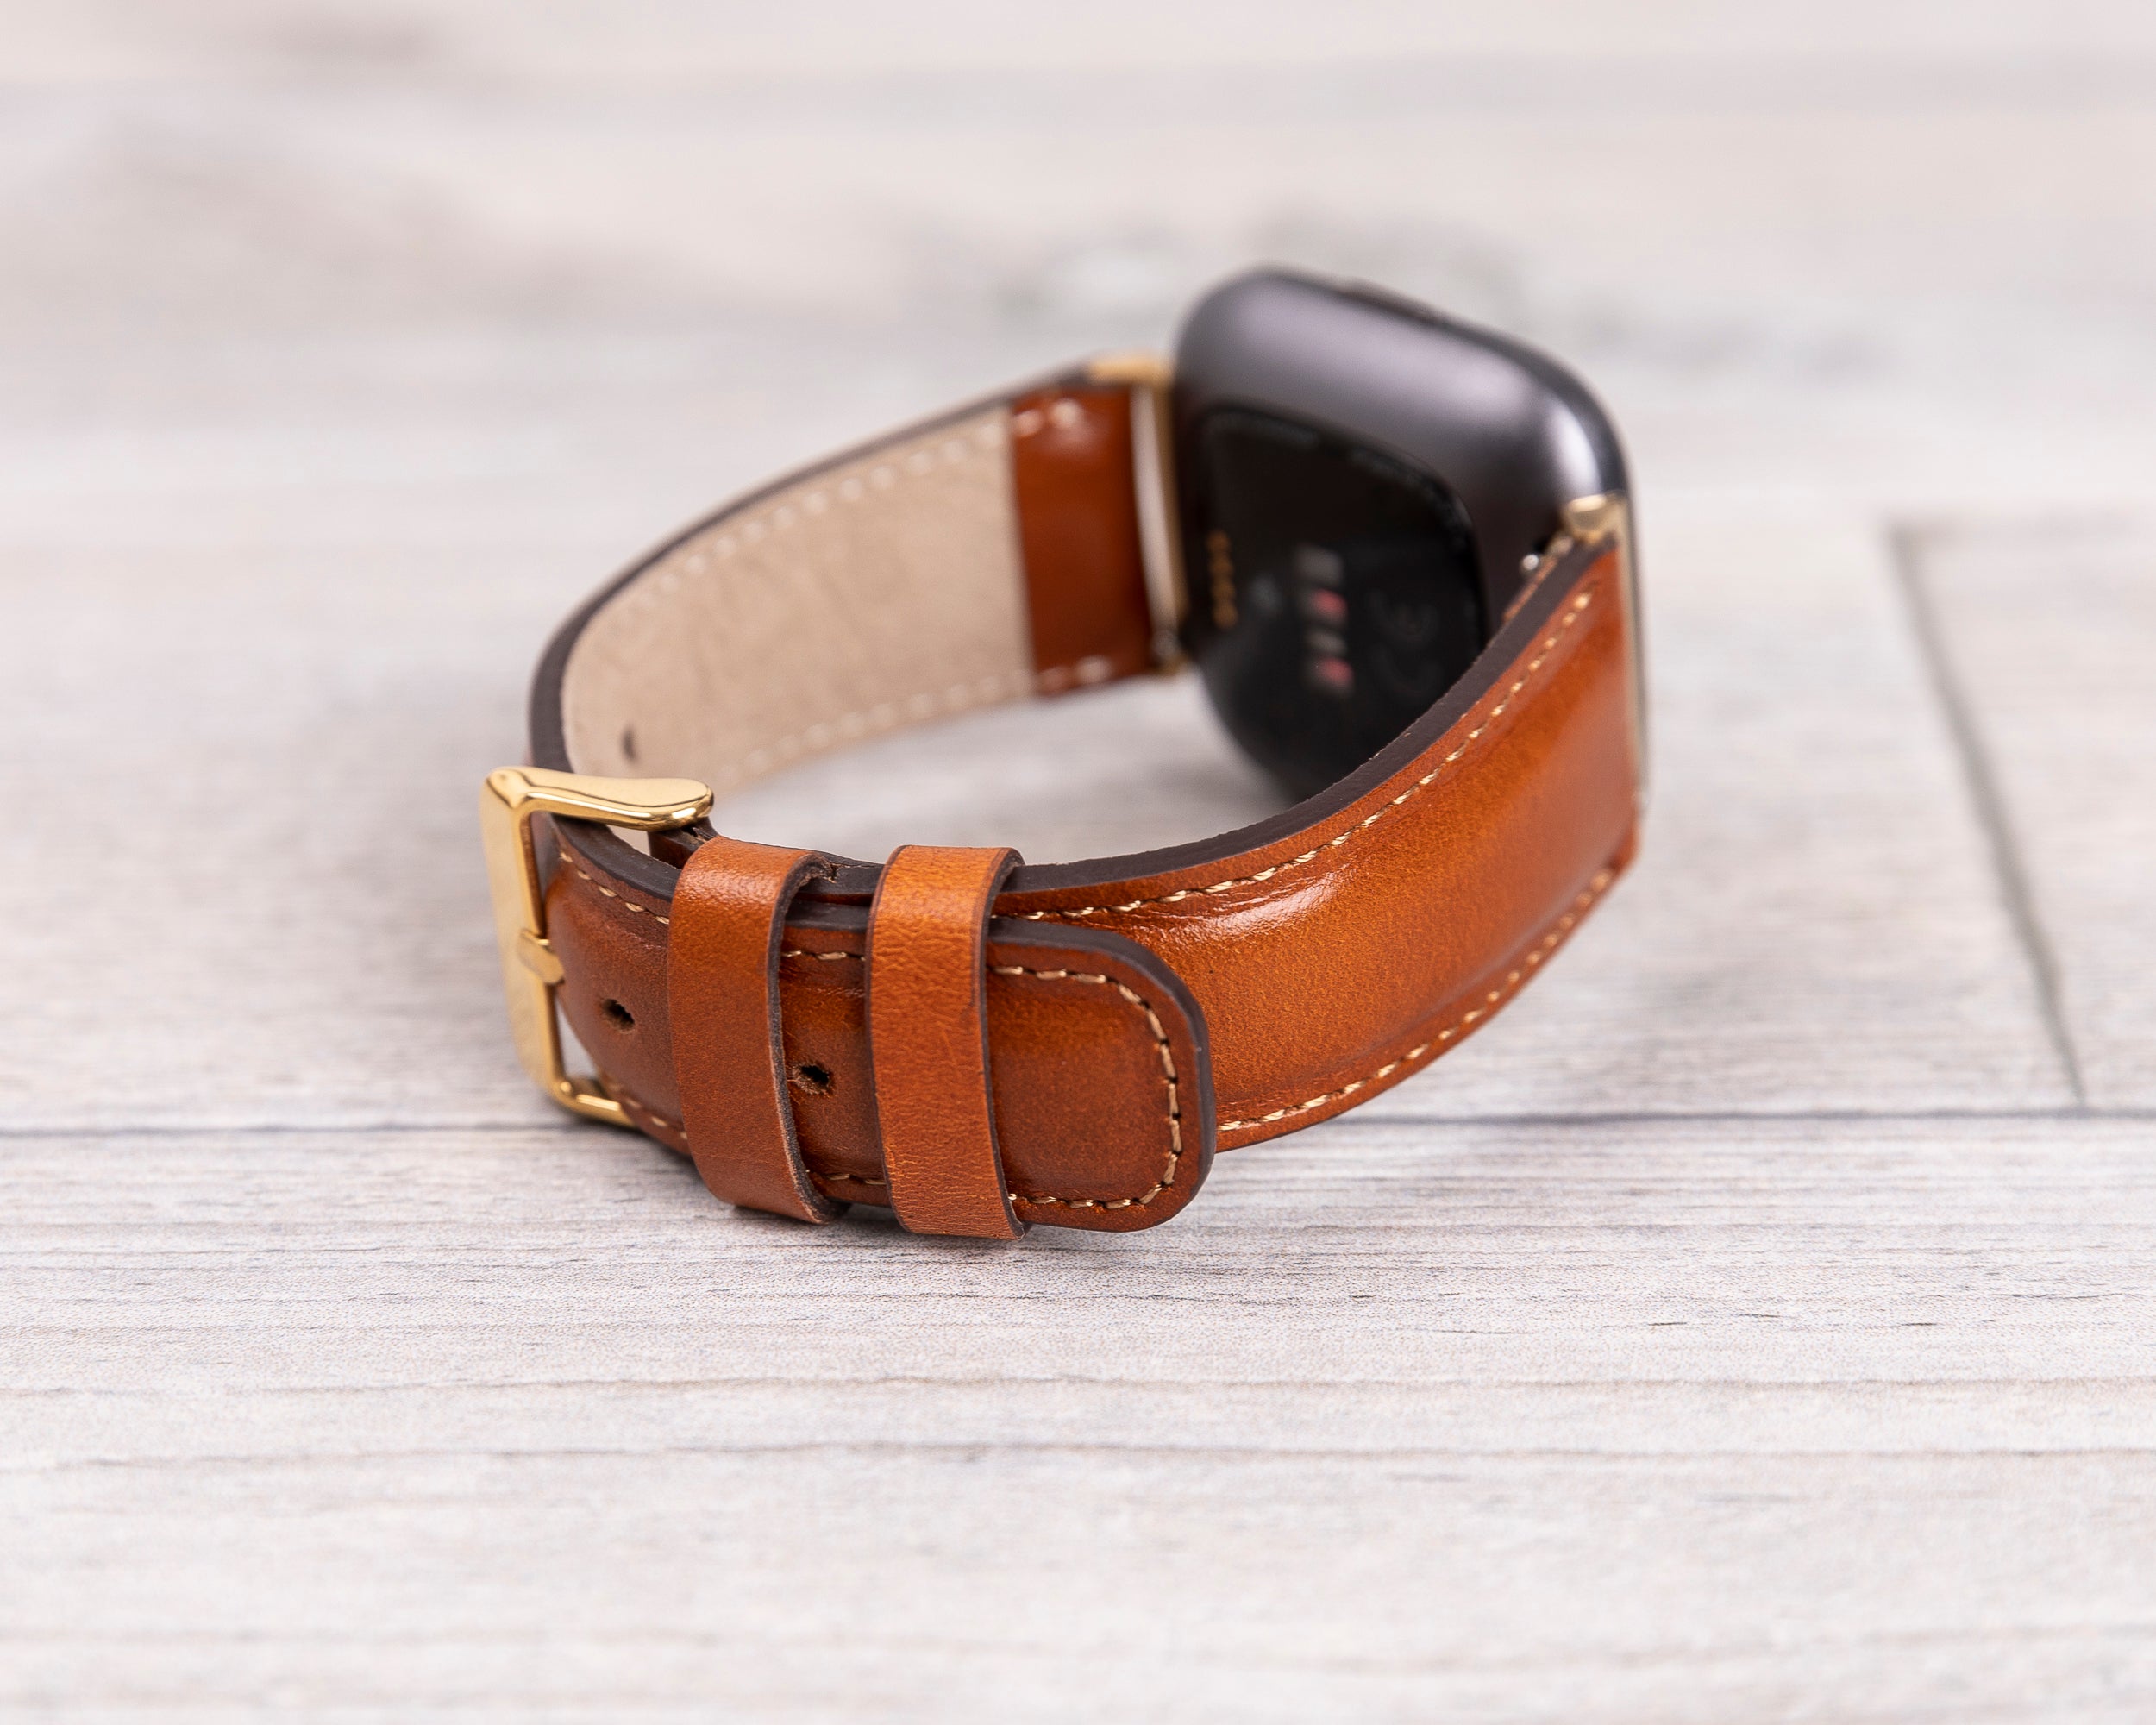 Tan Color Leather Band for Fitbit Watch